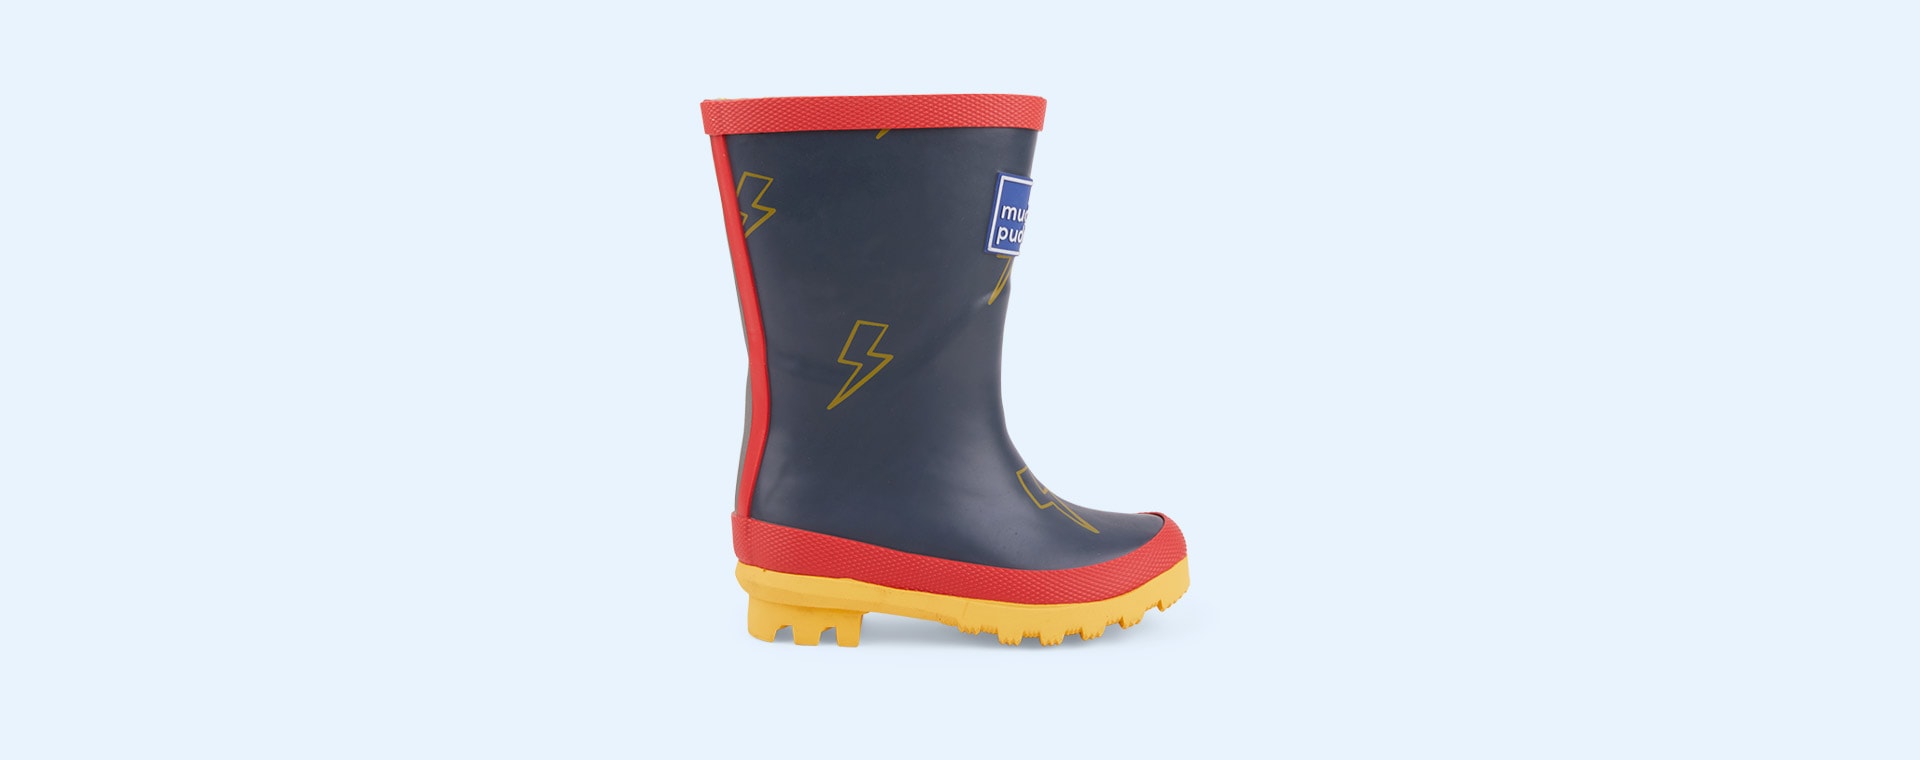 Navy Lightening Muddy Puddles Puddle Stomper Wellies